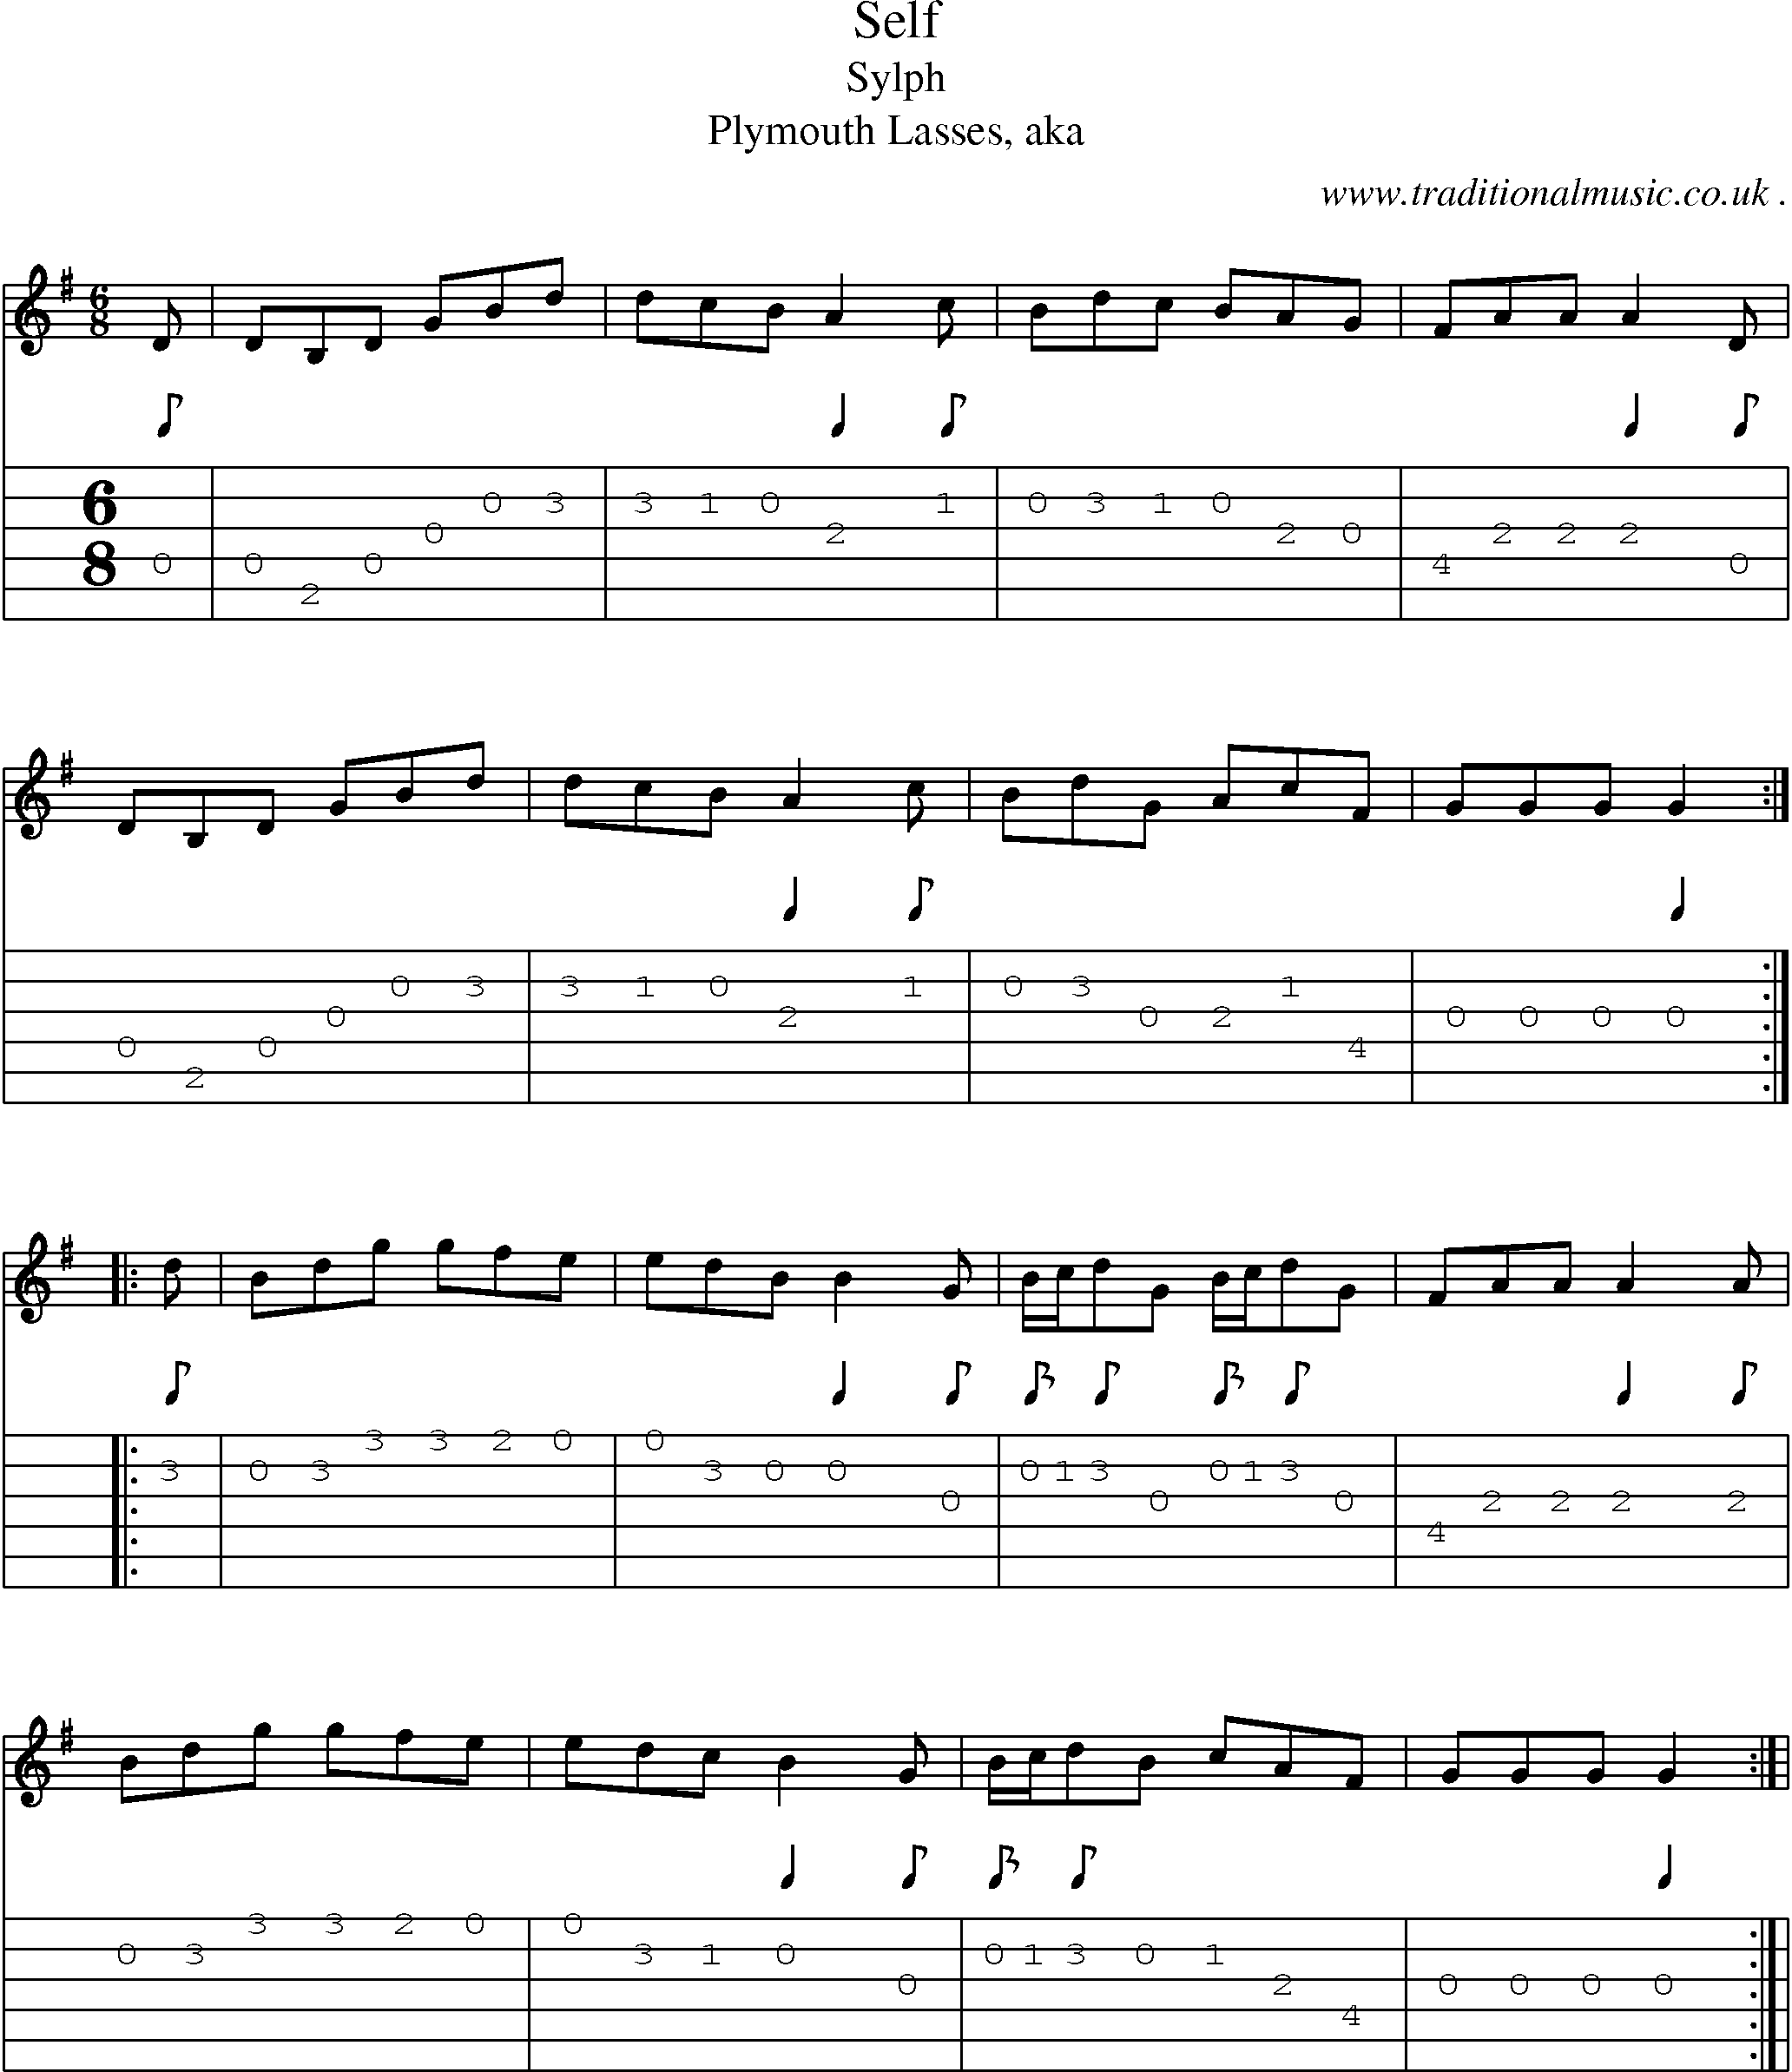 Sheet-Music and Guitar Tabs for Self